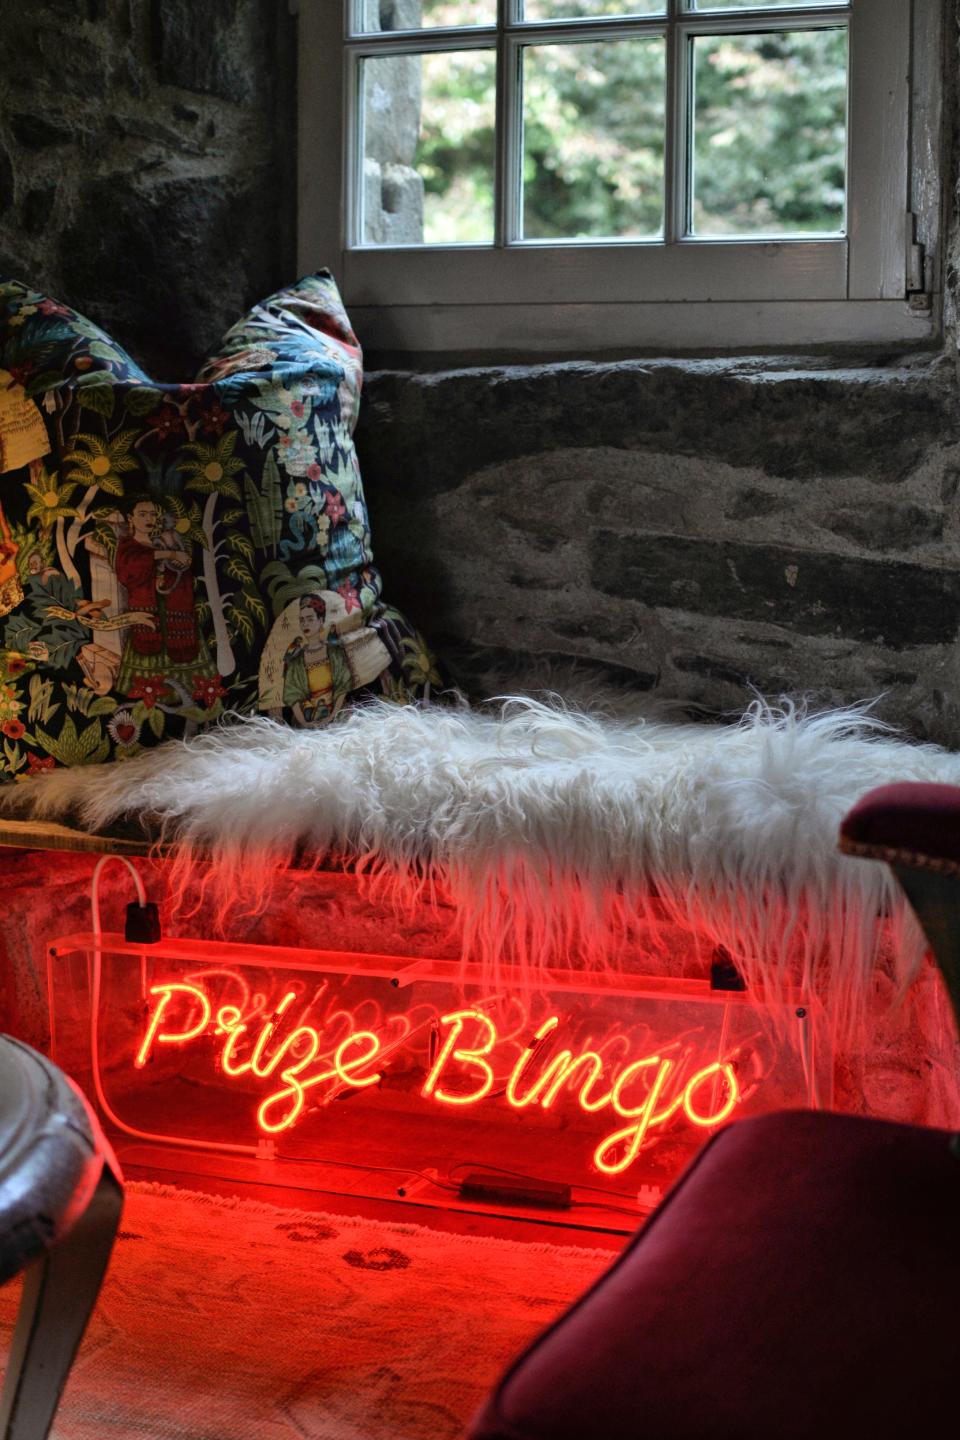 A window seat nook in Kilberry Castle, which features a neon bingo hall sign.